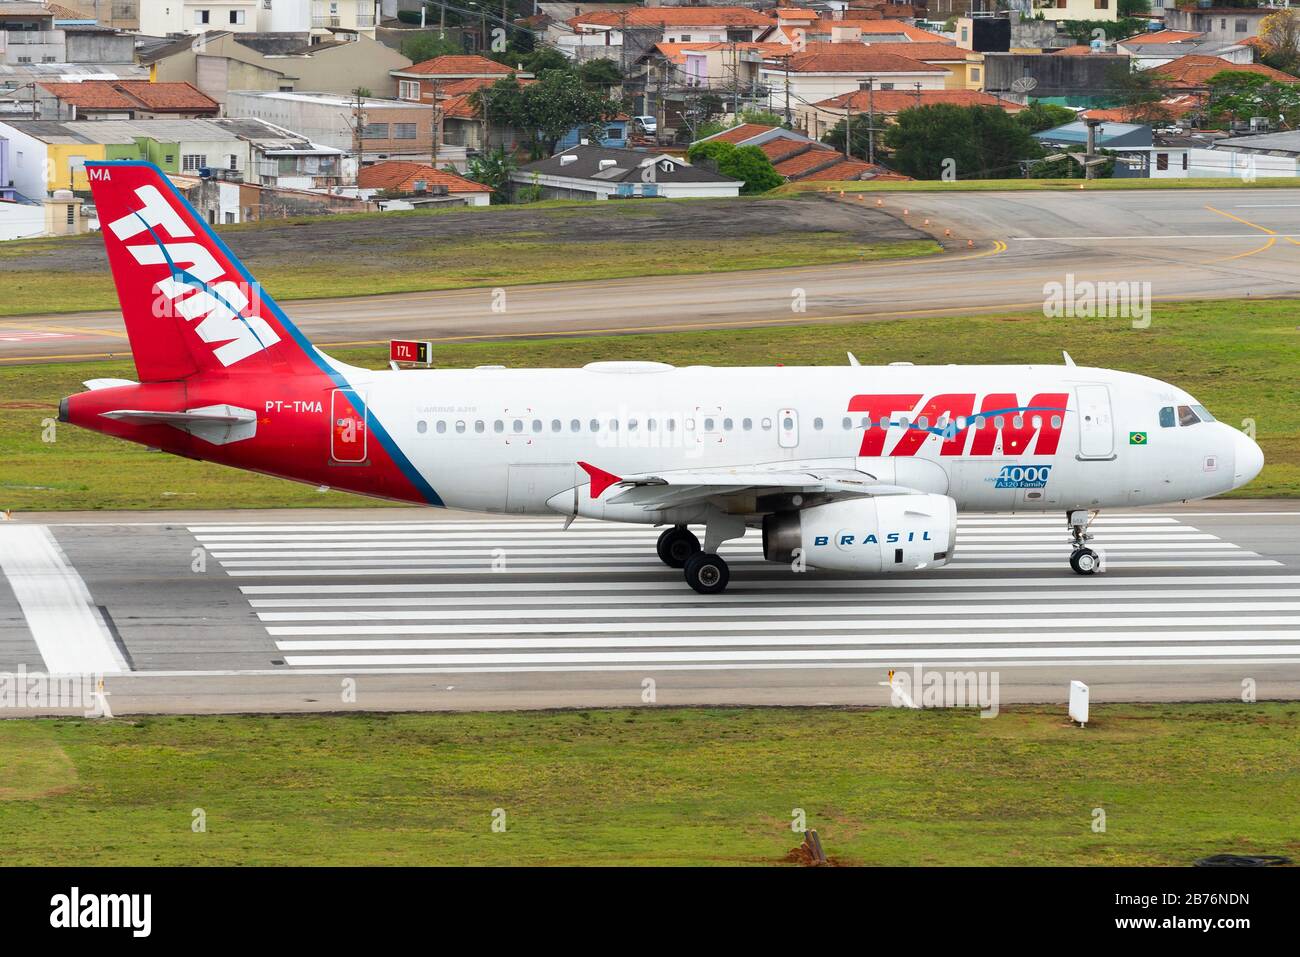 LATAM Airlines Airbus A319 wearing TAM Airlines old livery at Congonhas Airport in Sao Paulo, Brazil. Aircraft PT-TMA A320 family aircraft 4000th. Stock Photo